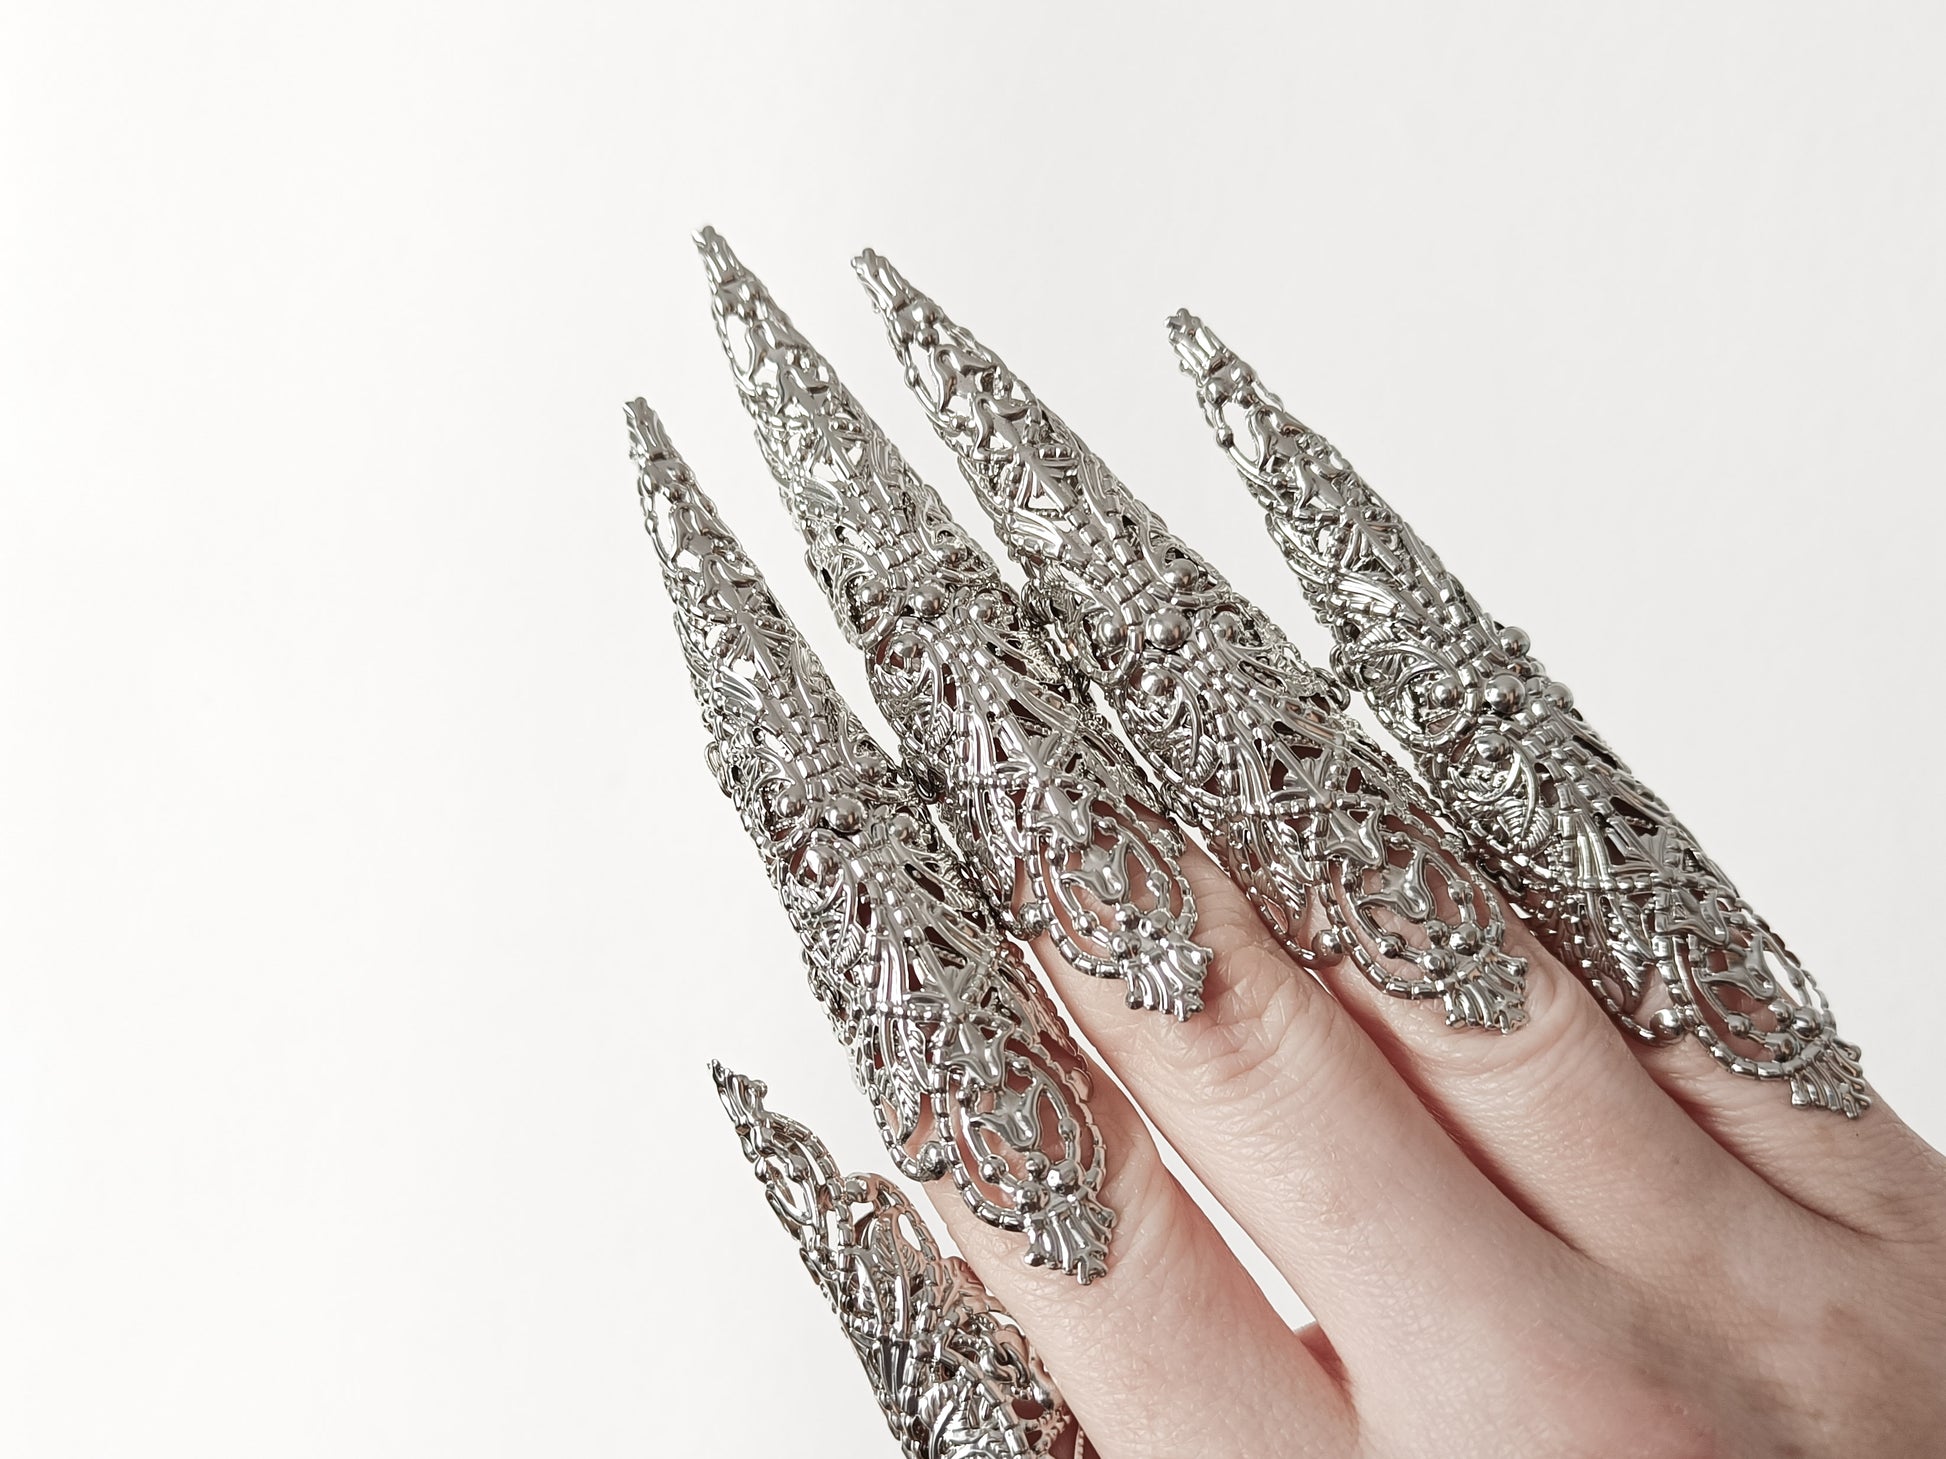 A hand adorned with a full set of Myril Jewels' extra long nail claw rings, showcasing a stunning neo-gothic design. These claws are a must-have for Halloween, adding a dark and bold edge to gothic-chic and witchcore styles, and are perfect for everyday wear or as a statement piece at a rave party or festival.